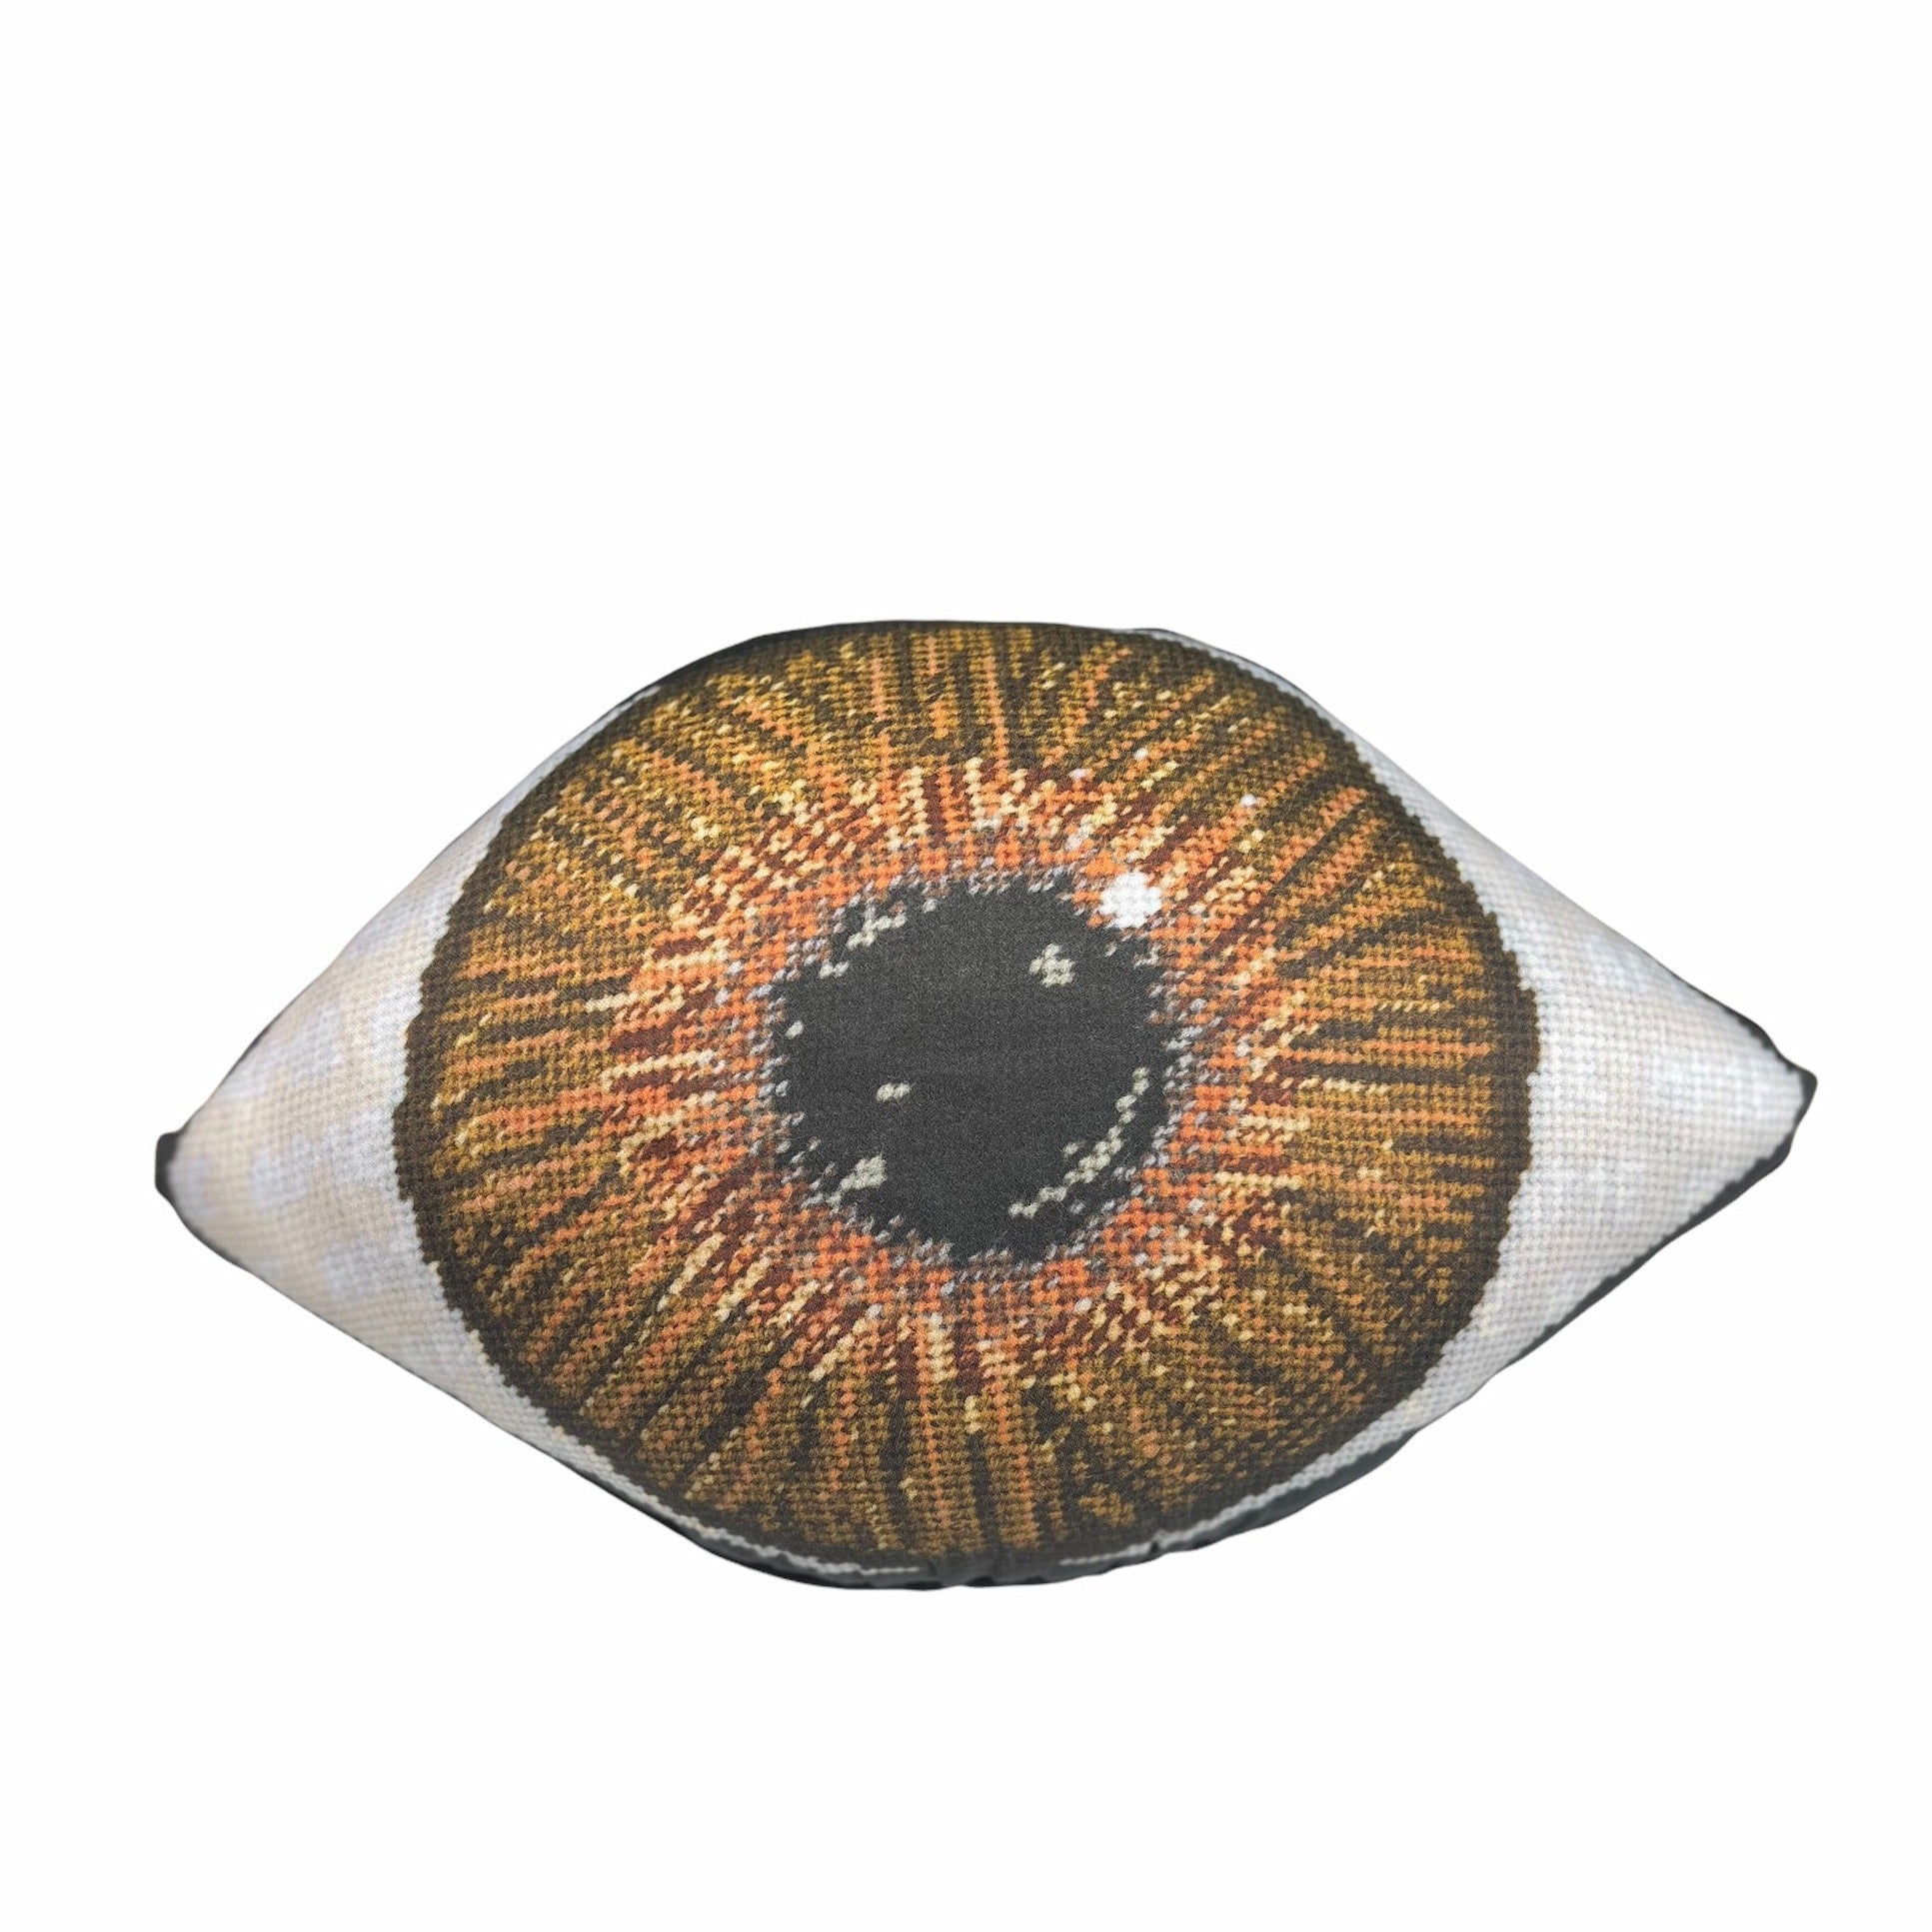 brown eye sculpted pillow has iris is gold at center, gradually turning to a dark brown - very detailed